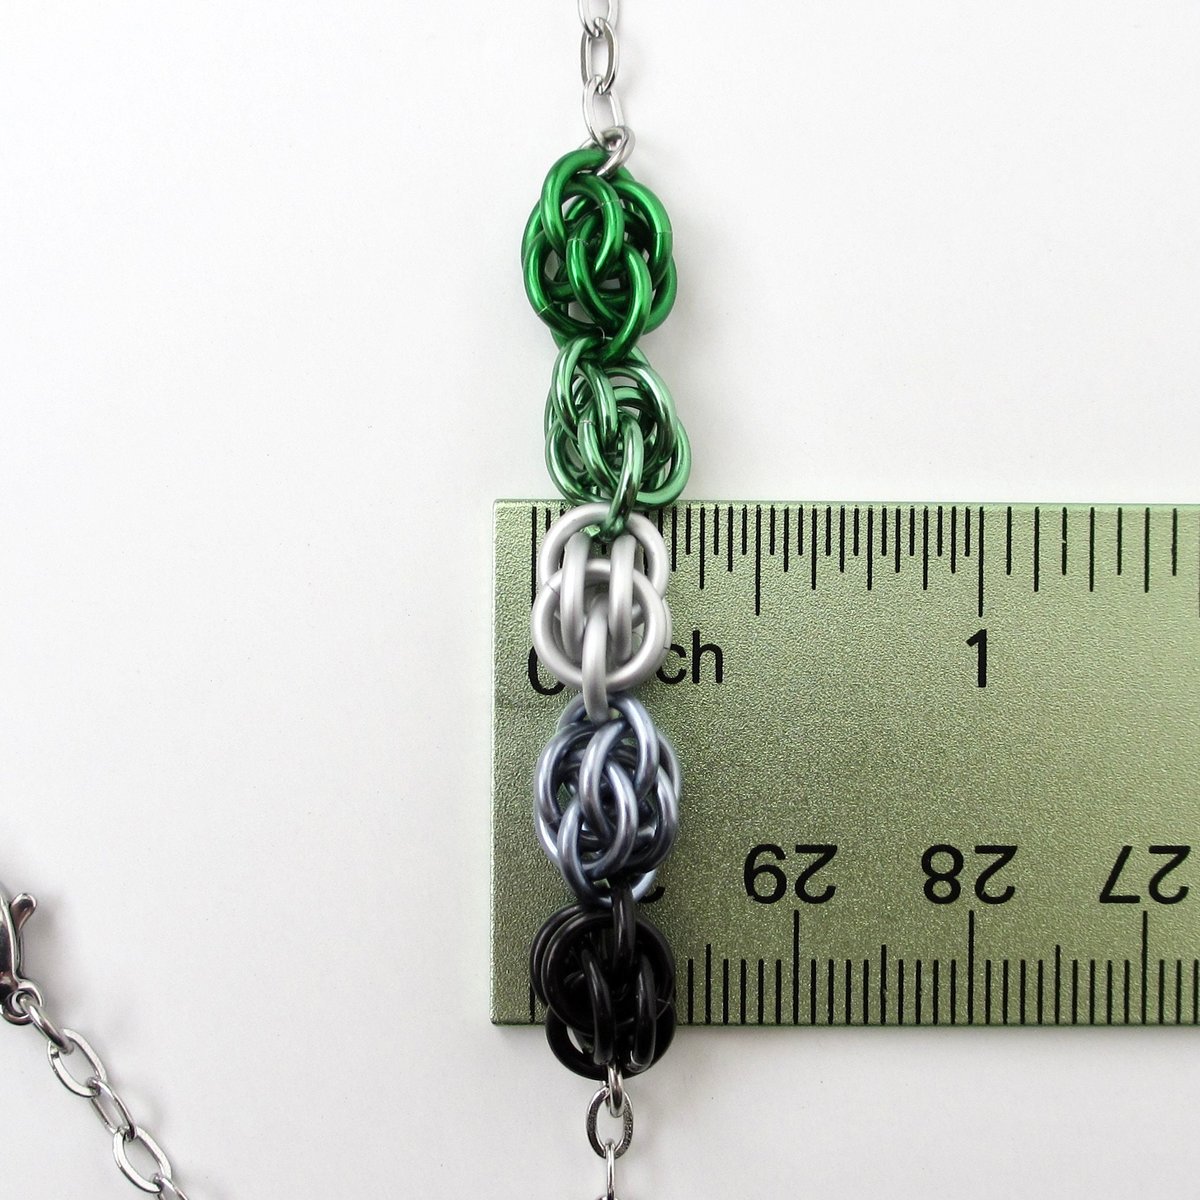 Aromantic pride necklace, chainmail jewelry, Sweetpea weave - green, white, gray, black